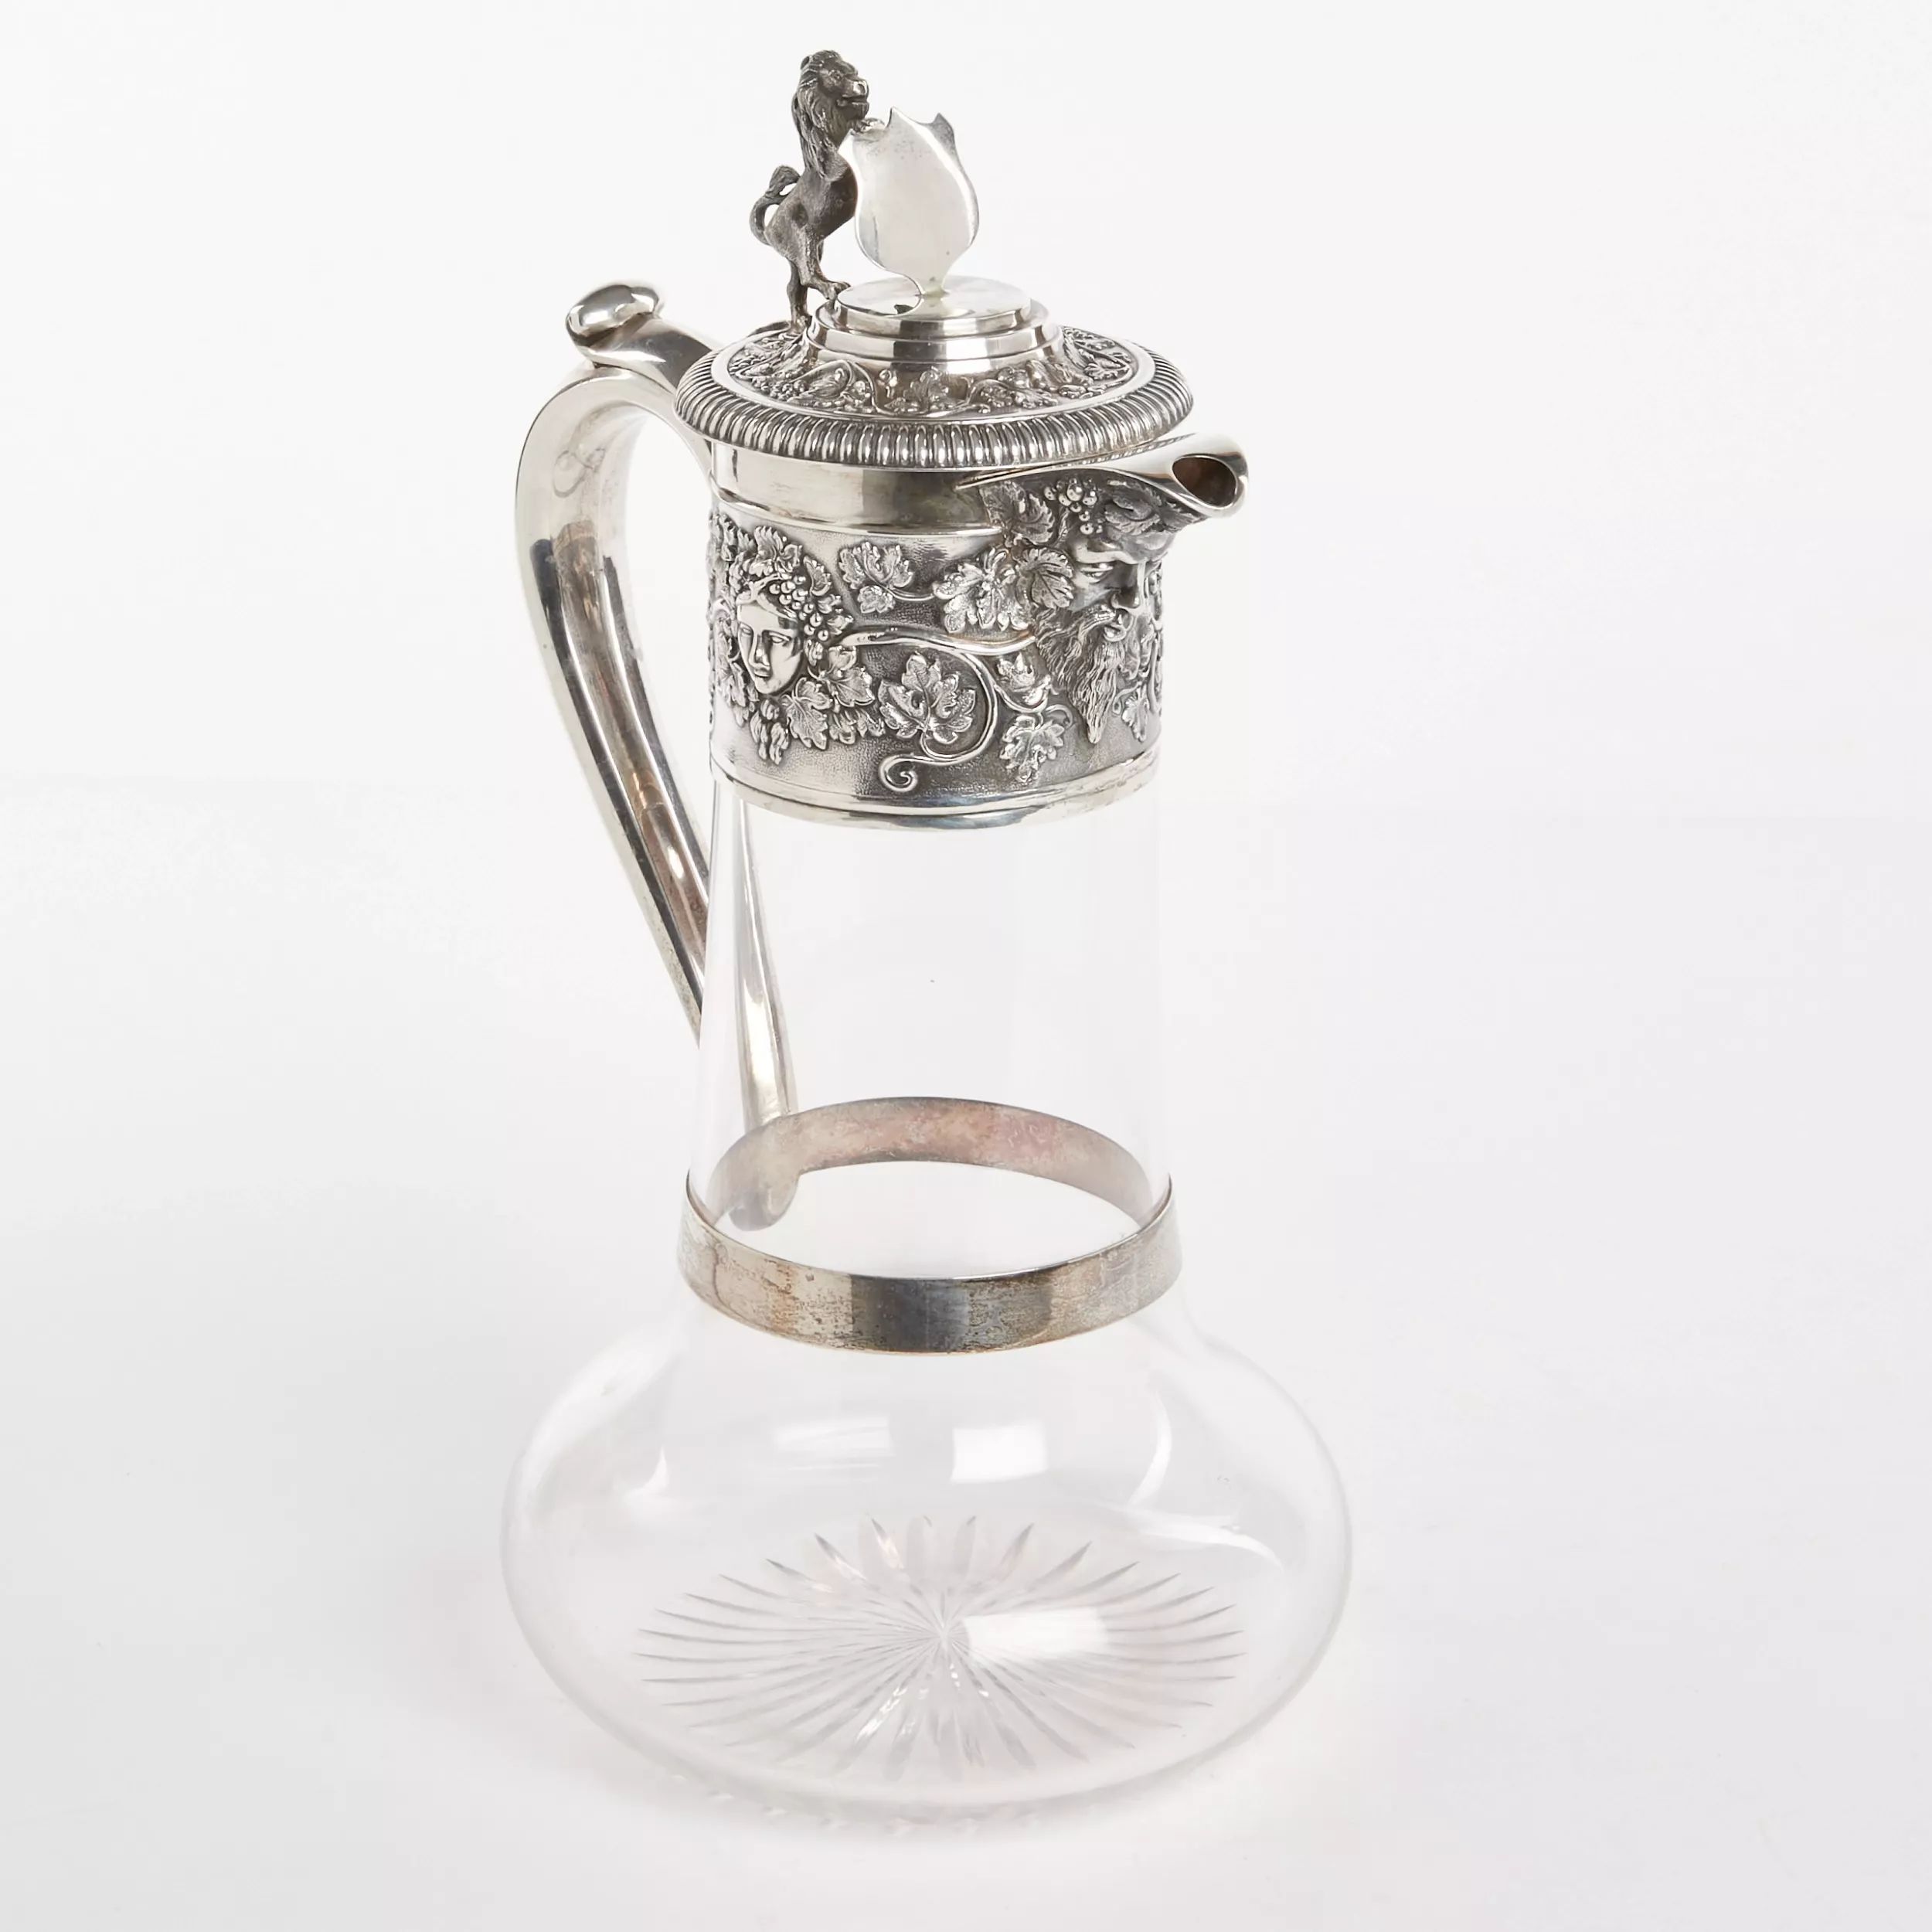 Silver-wine-jug-with-glass-Horace-Woodward-&-Hugh-Taylor-London-1893